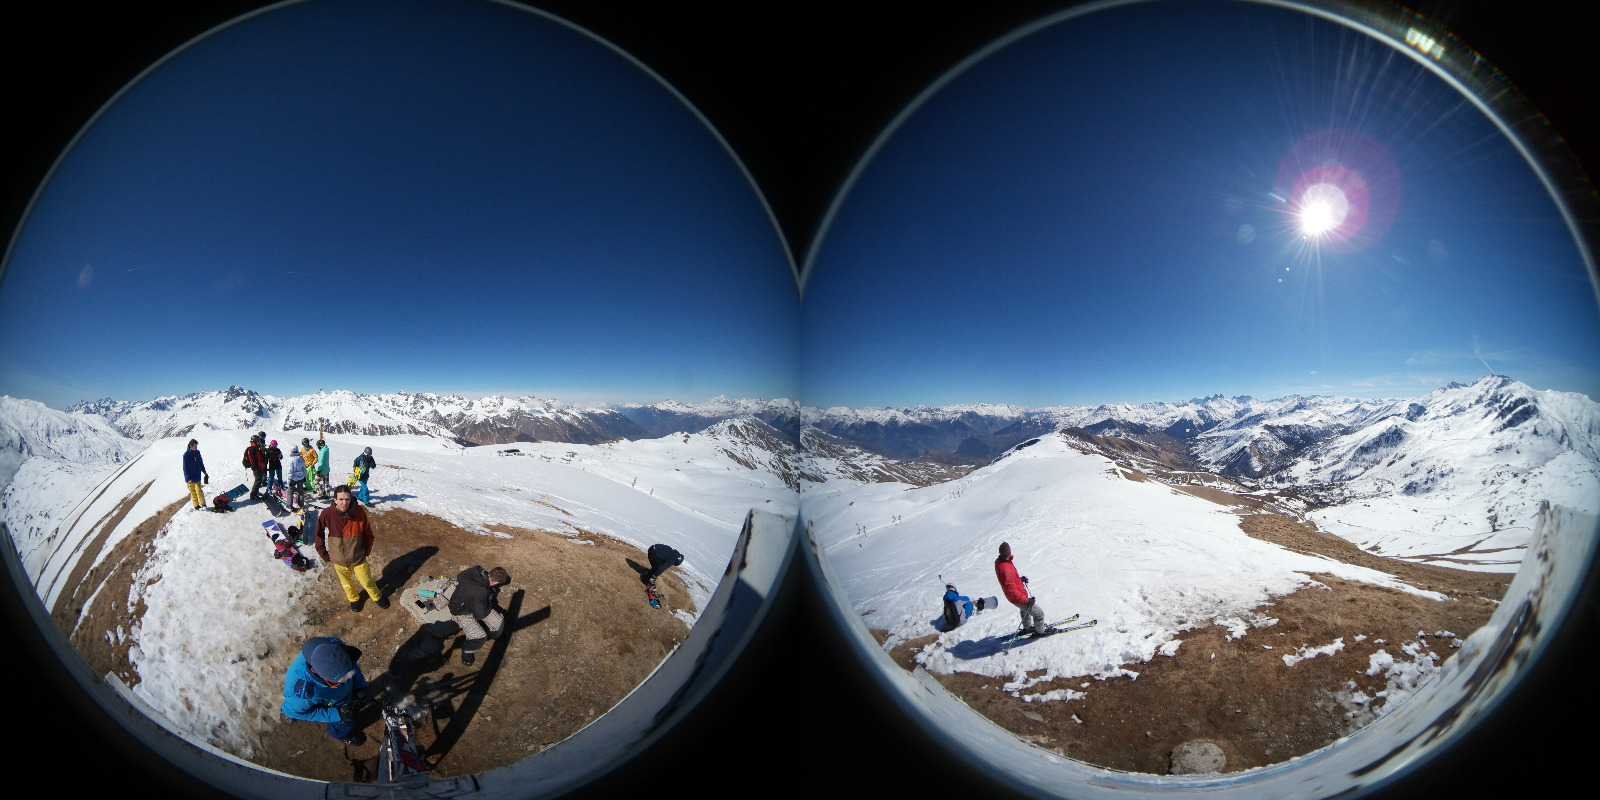 360° Video and 3D VR: The difference